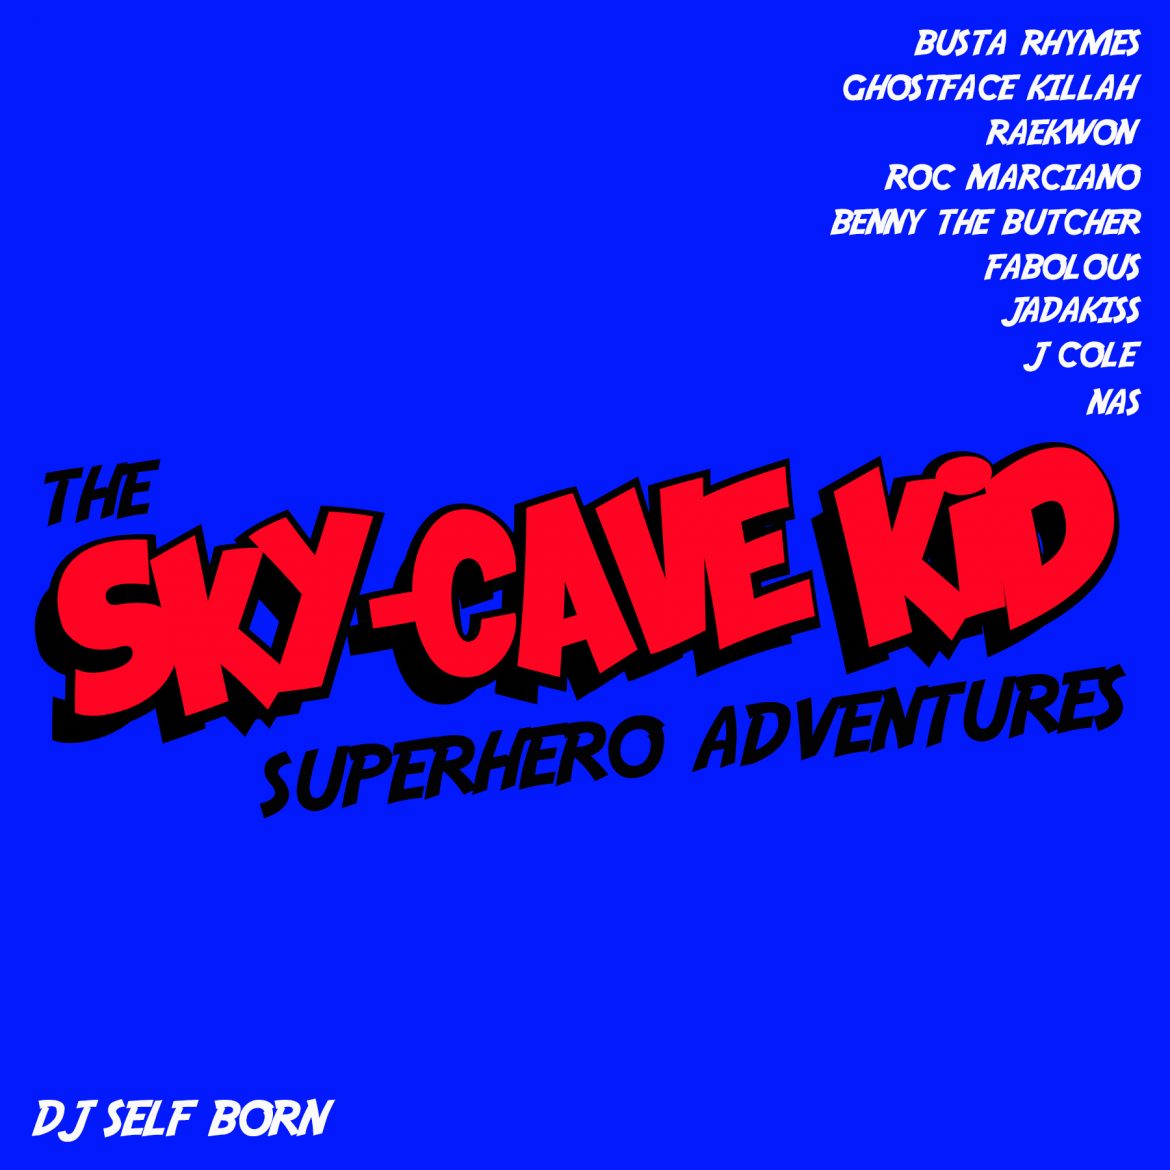 ‘DJ Self Born’ has his finger on the pulse of Hip-Hop and Rap music as he unleashes new album ”The Sky-Cave Kid Superhero Adventures’.